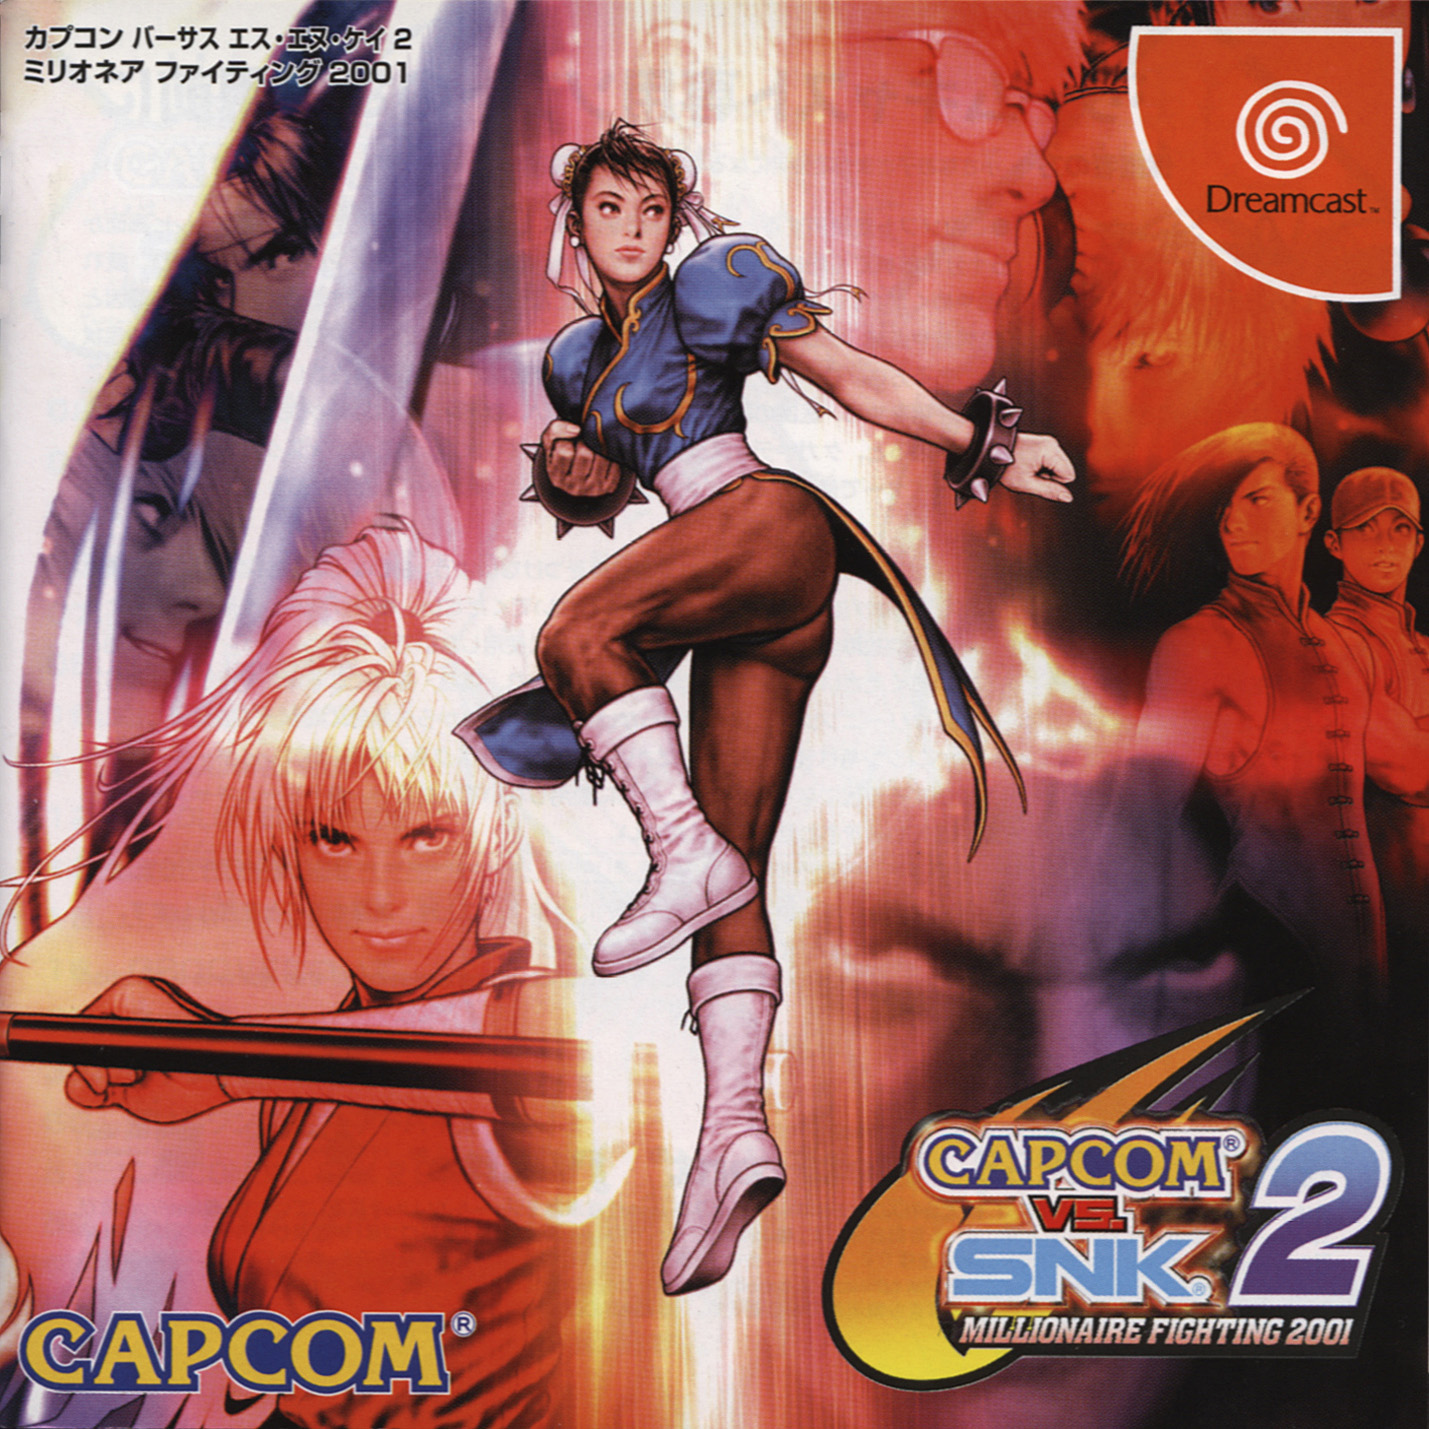 TGDB - Browse - Game - Capcom vs. SNK 2: Millionaire Fighting 2001